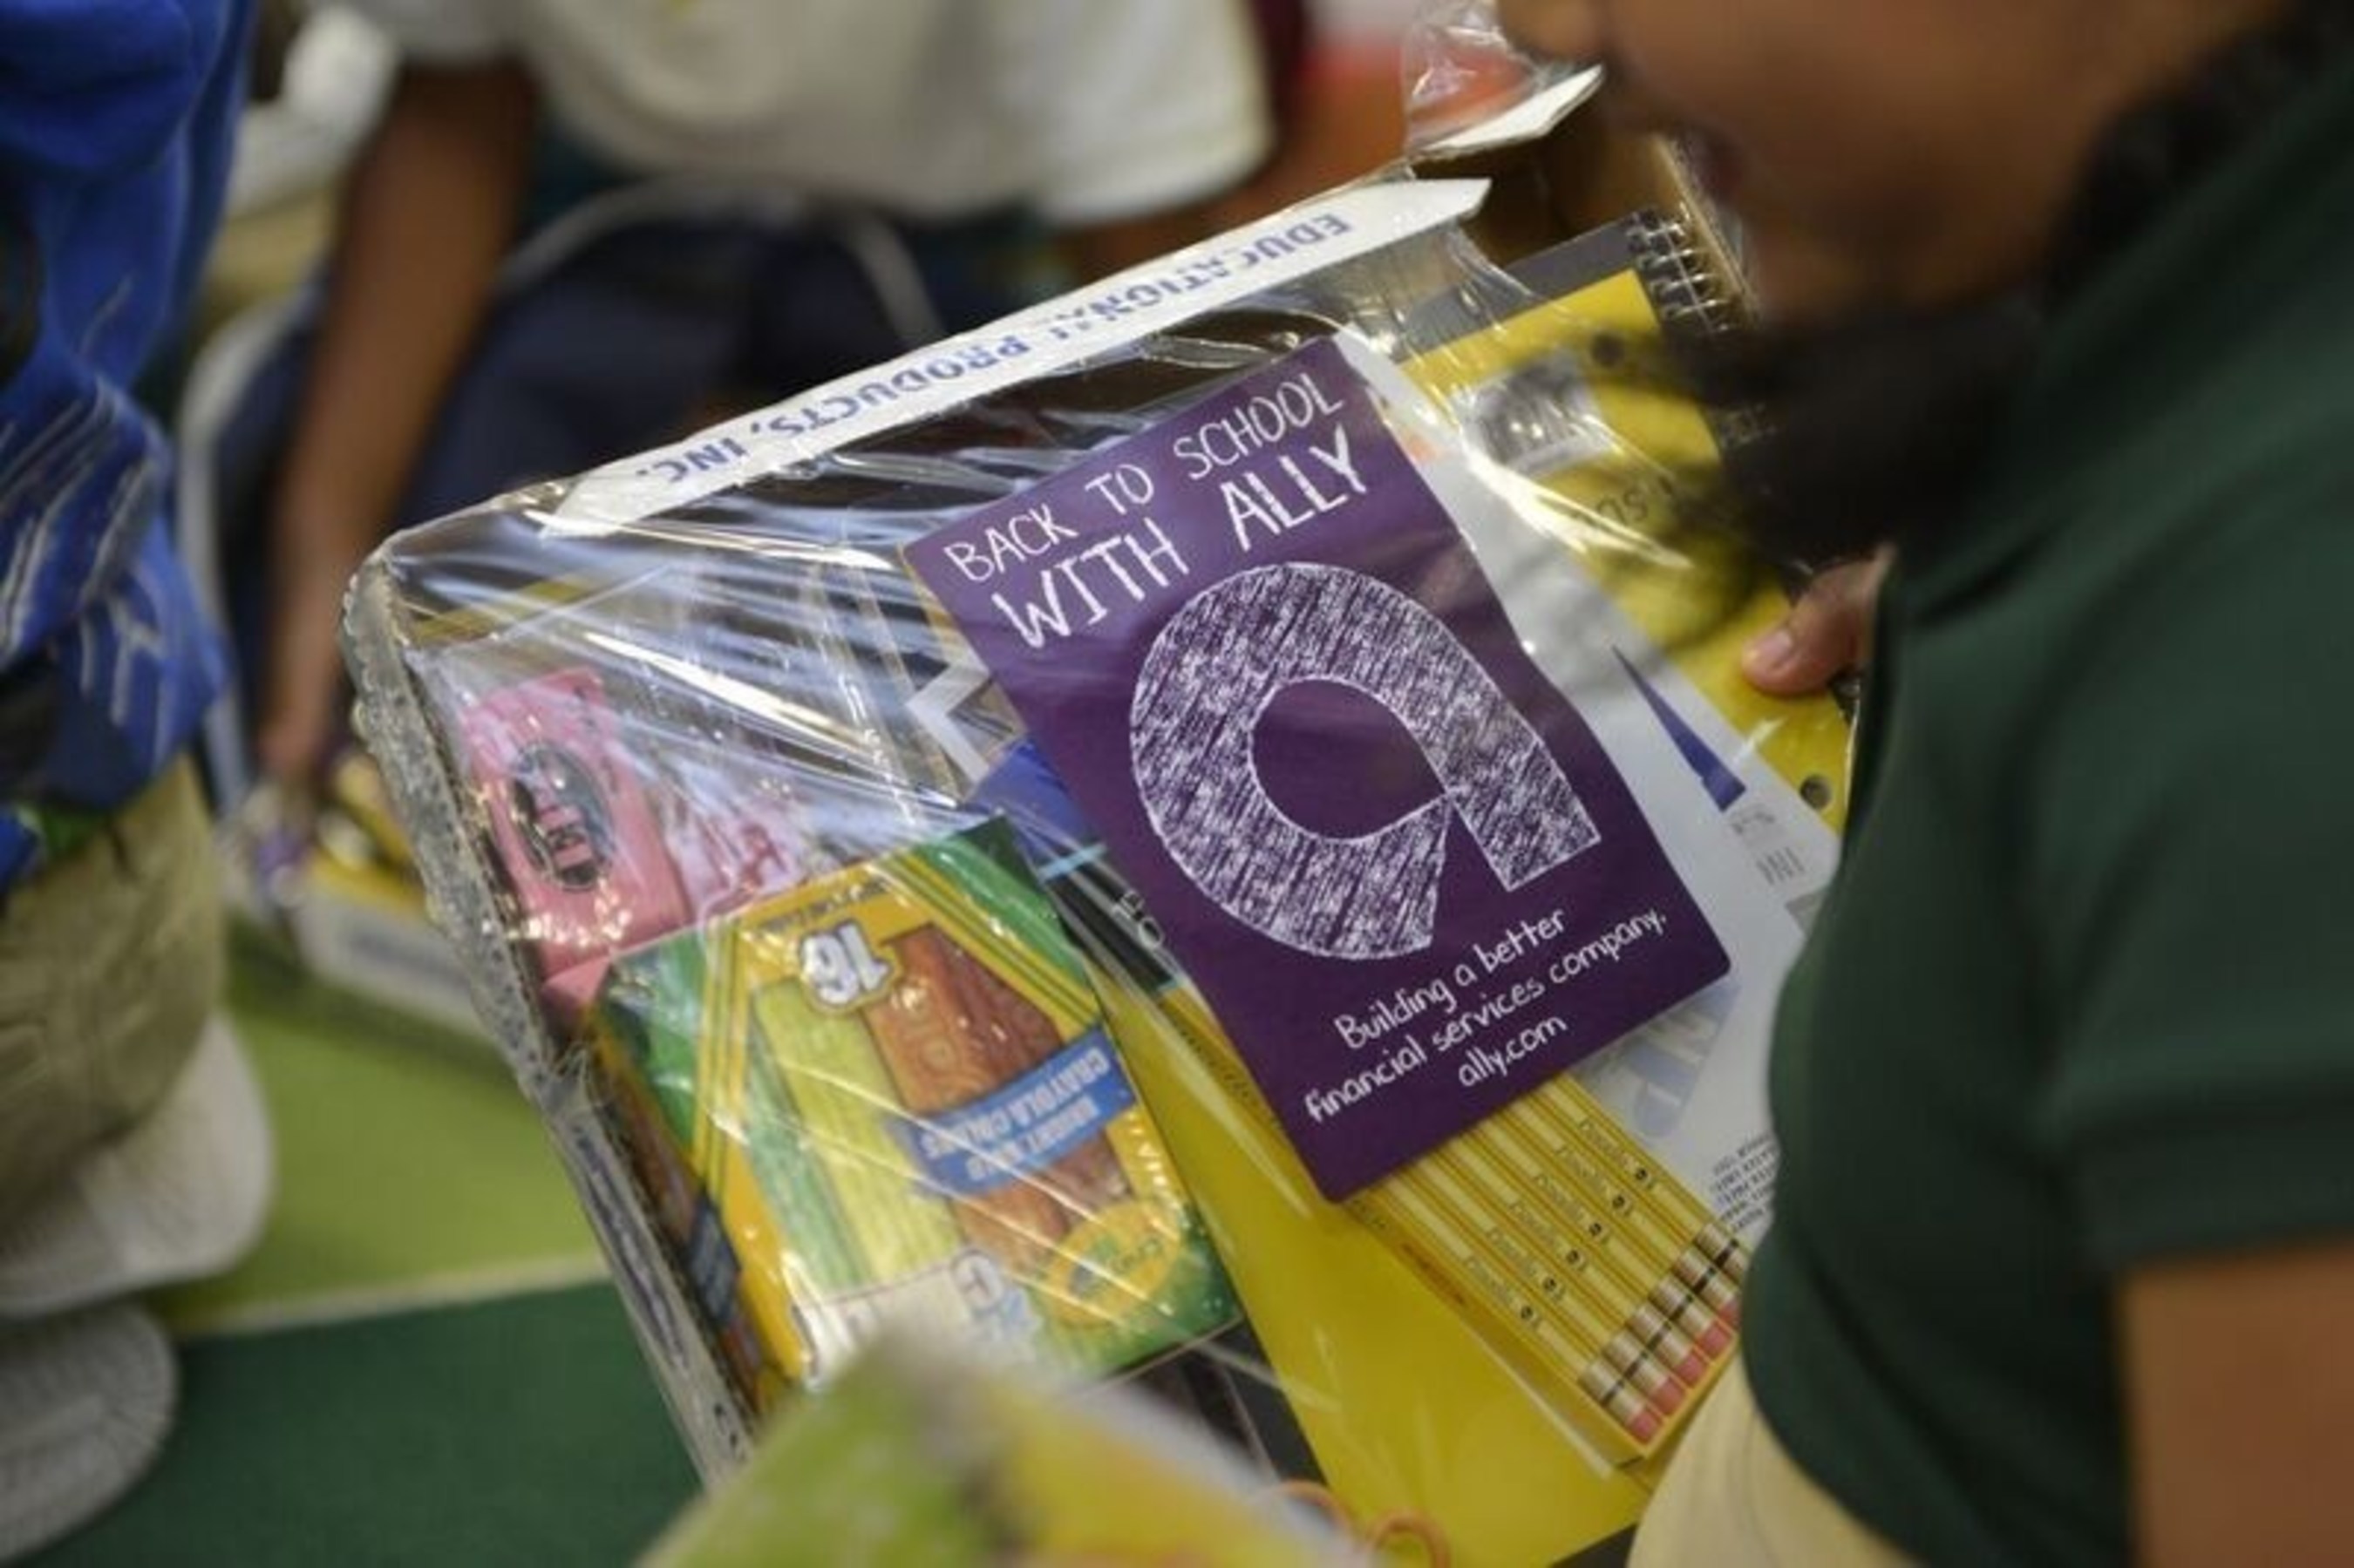 Ally and Classroom Central delivered school supplies to 1,020 Charlotte students.